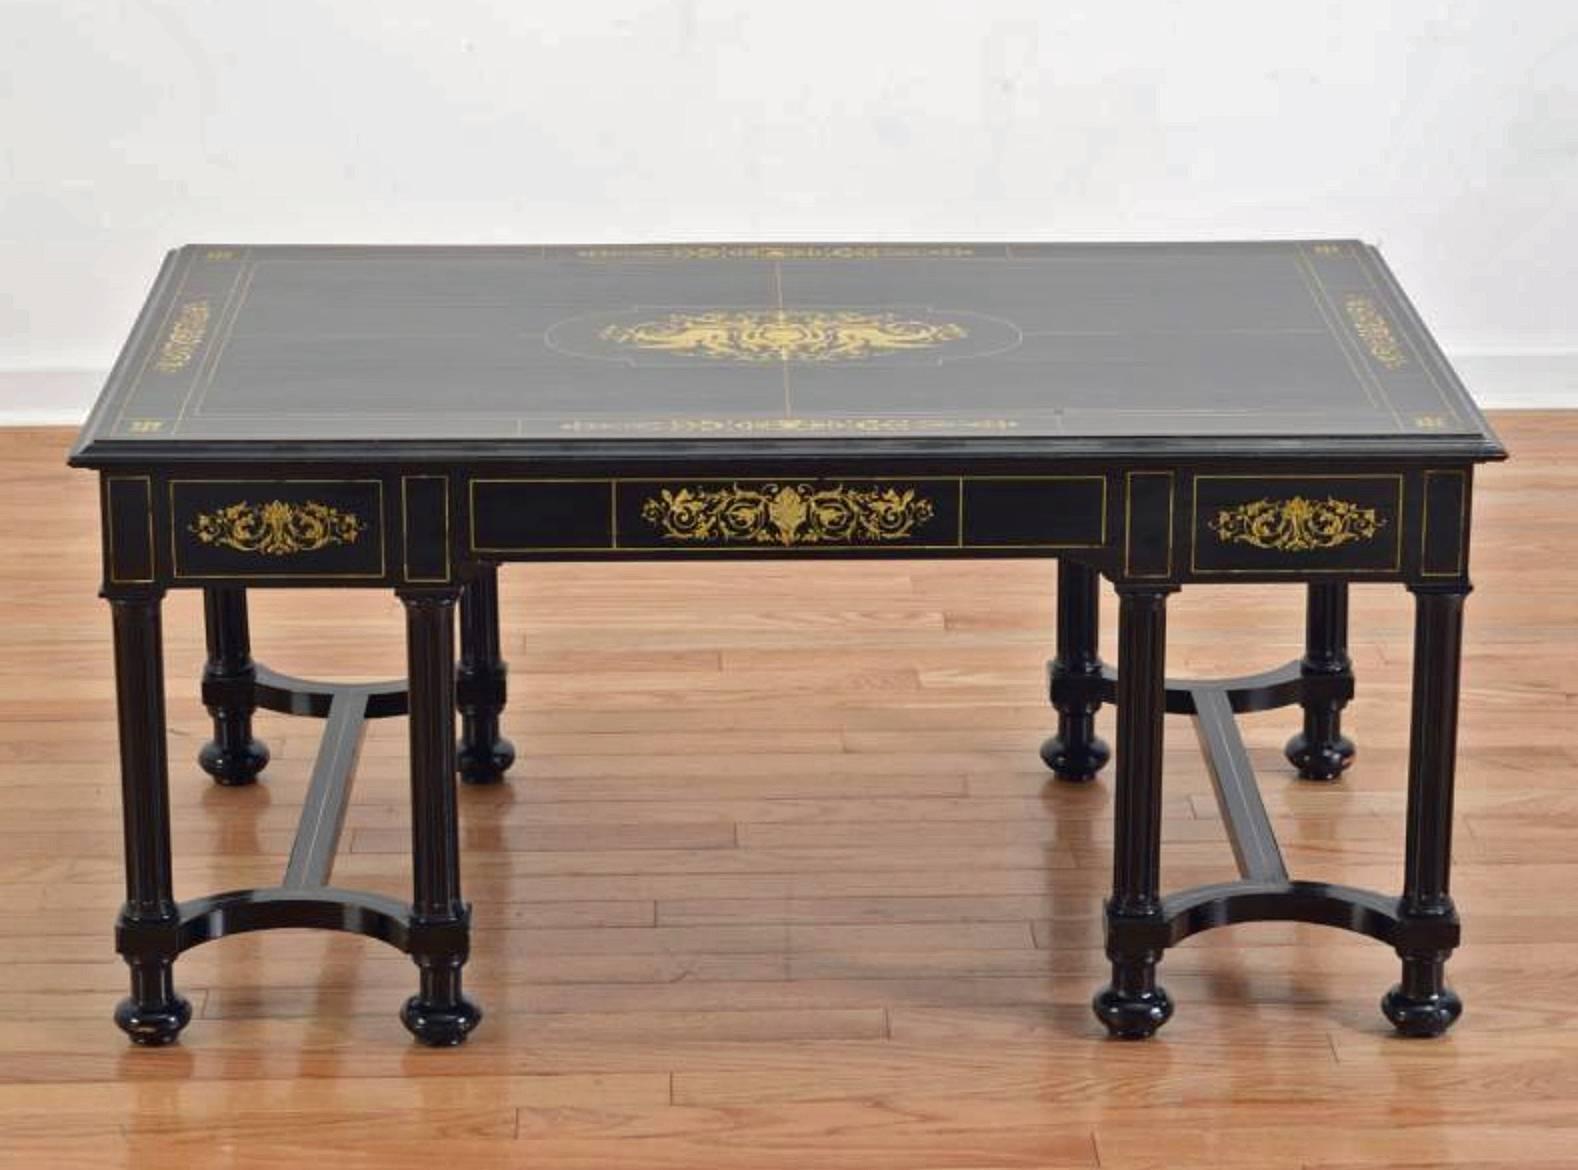 A fine Italian ebonized and marquetry.
Inlaid low table.
19th century.

The rectangular top with marquetry inlaid throughout over a frieze with three dovetailed drawers all resting on columnar legs.

Height 20 in. Width 43 ½ in. Depth 26